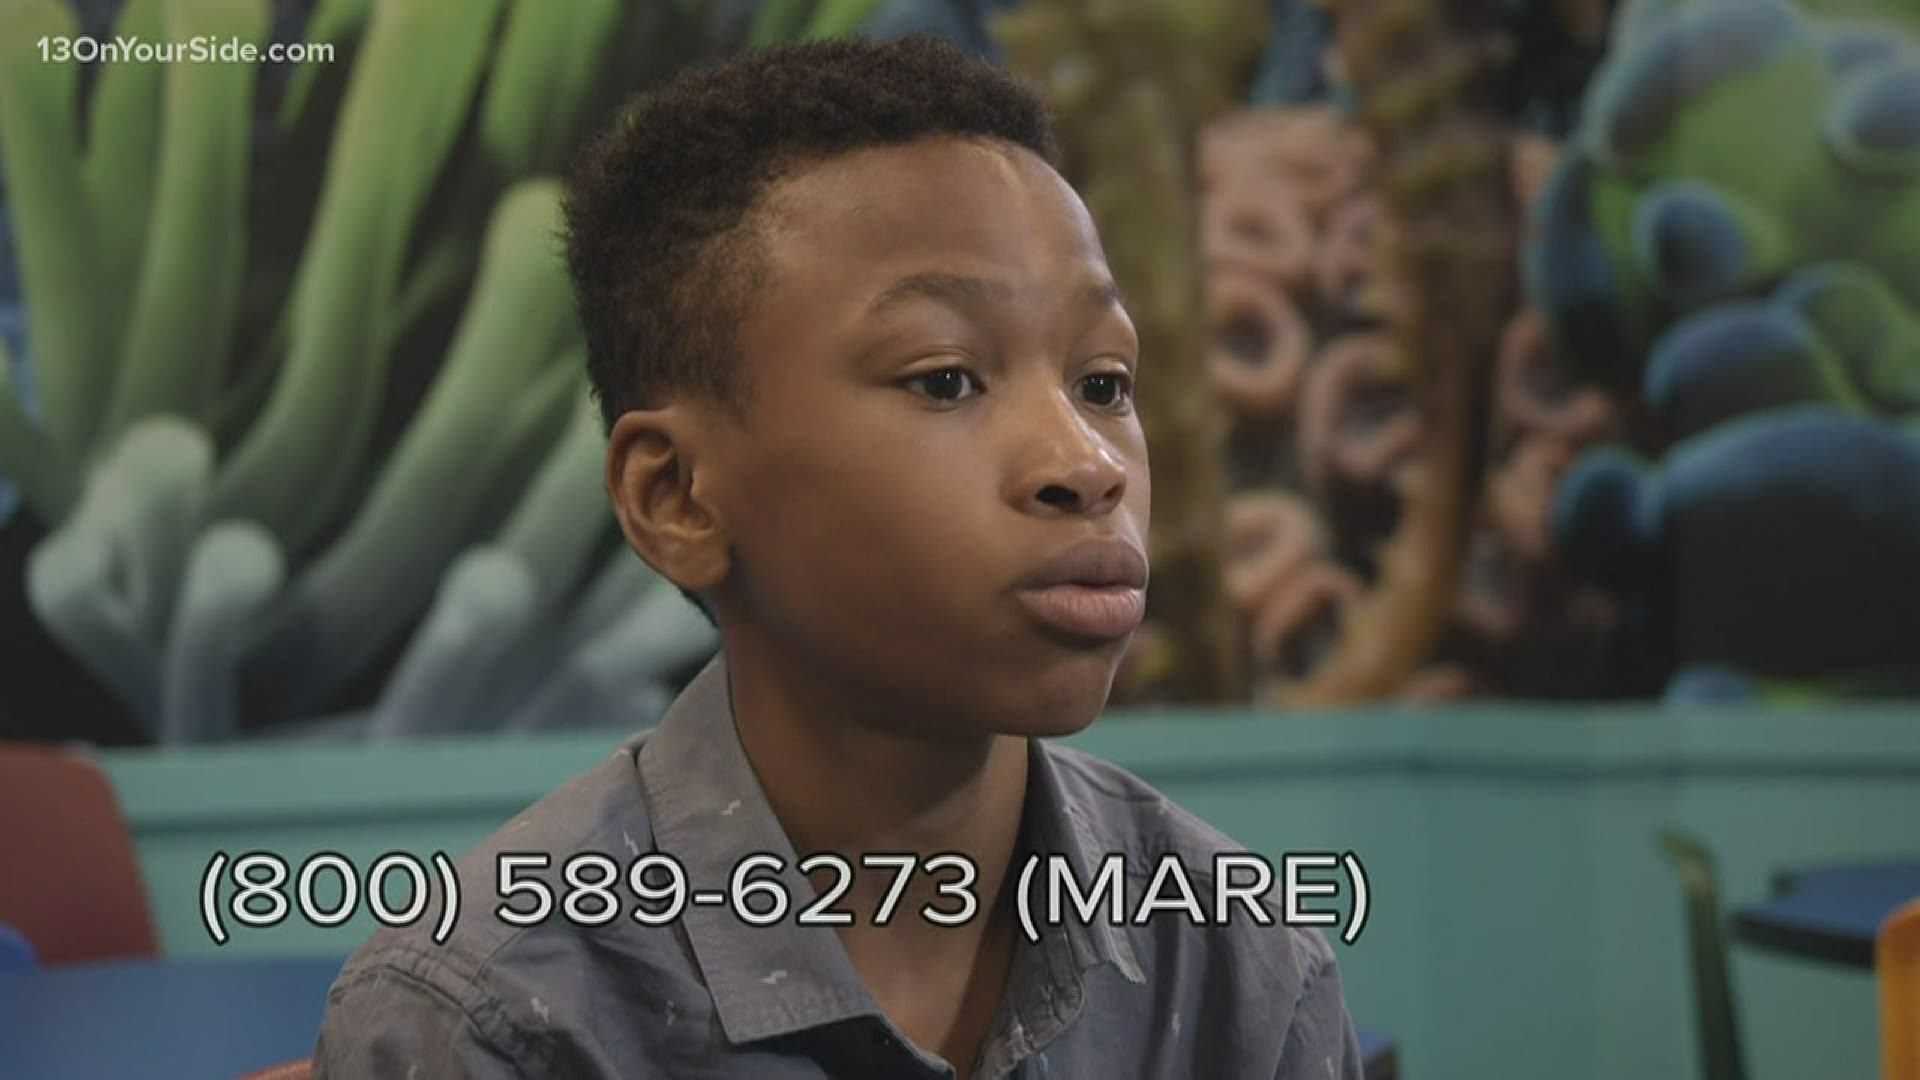 Help this 12-Year-Old find his forever family.